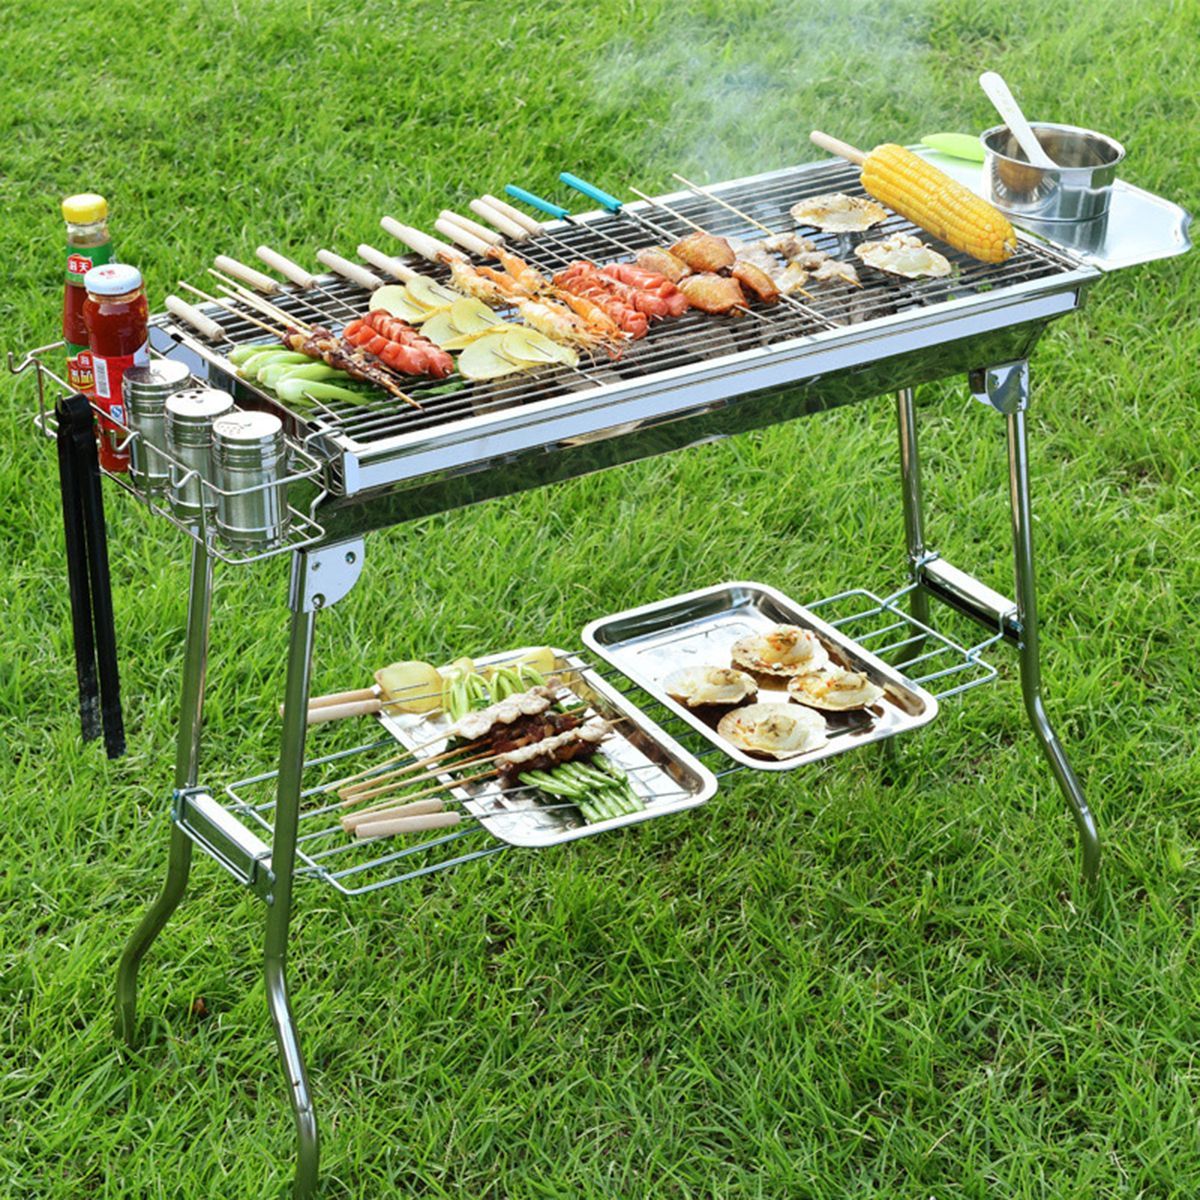 Portable-Household-BBQ-Grill-Stainless-Steel-Folding-BBQ-Grill-Camping-Picnic-1695907